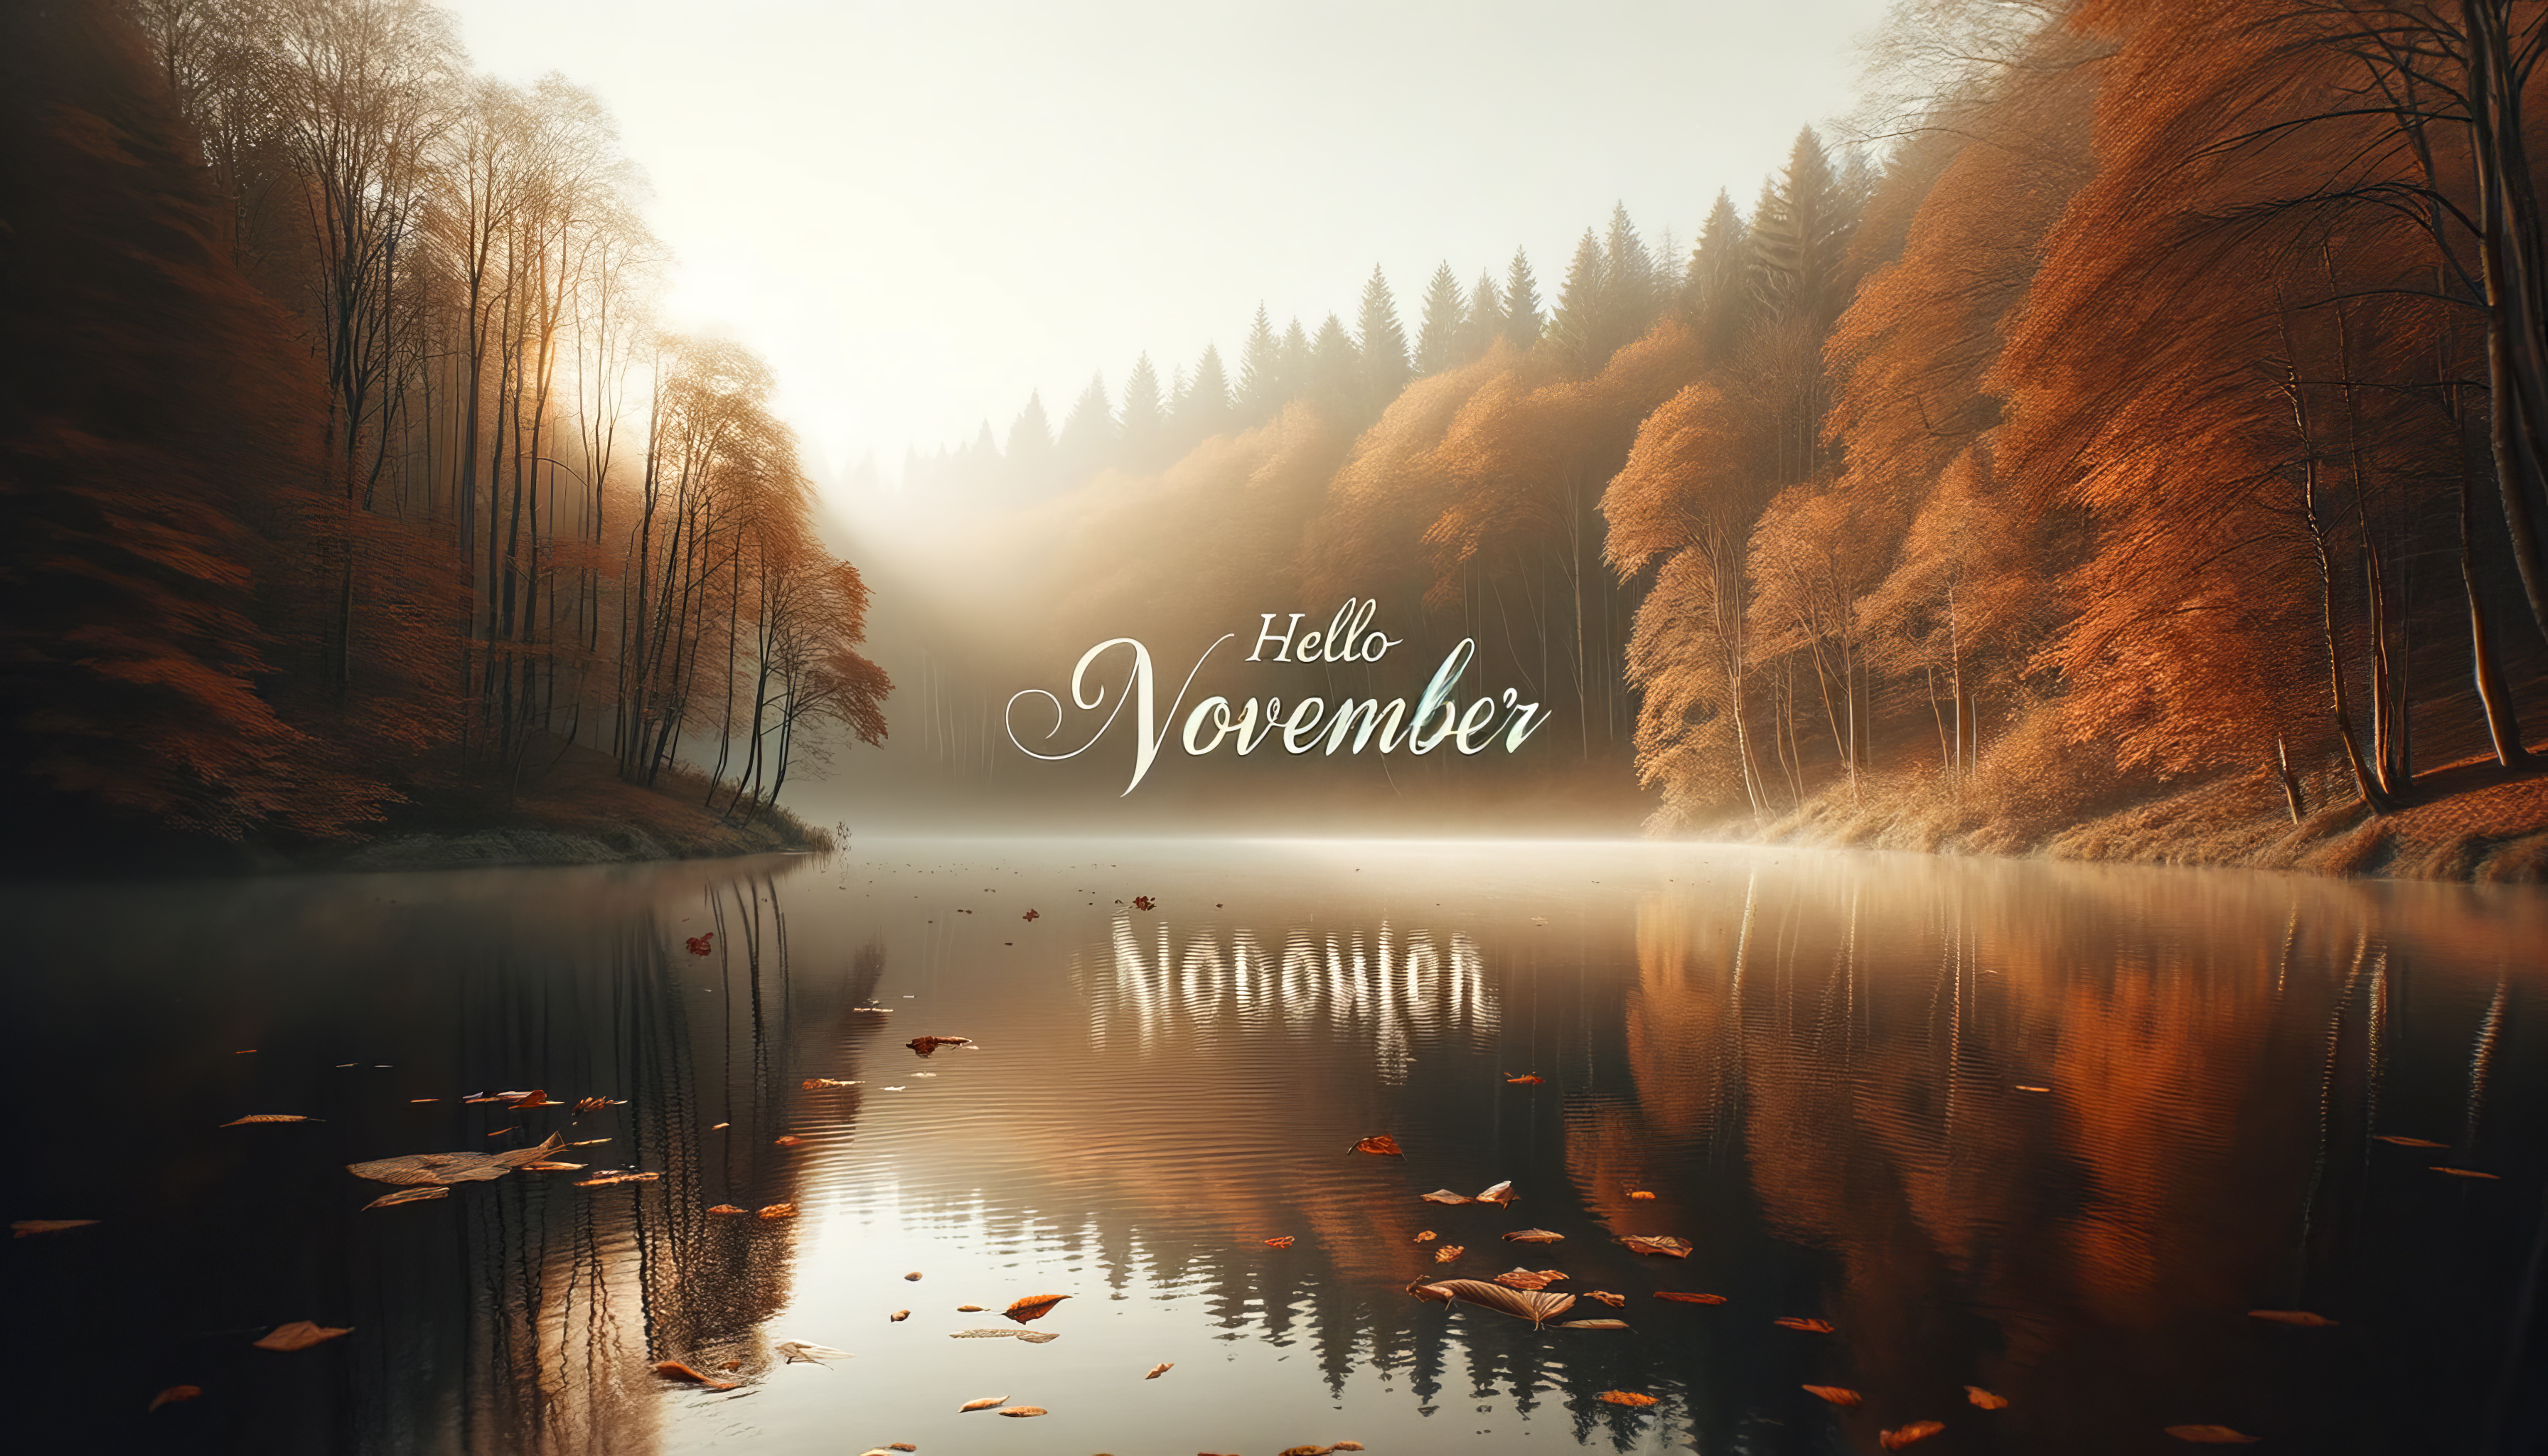 Misty autumn forest with Hello November text reflected on calm lake for HD desktop wallpaper.